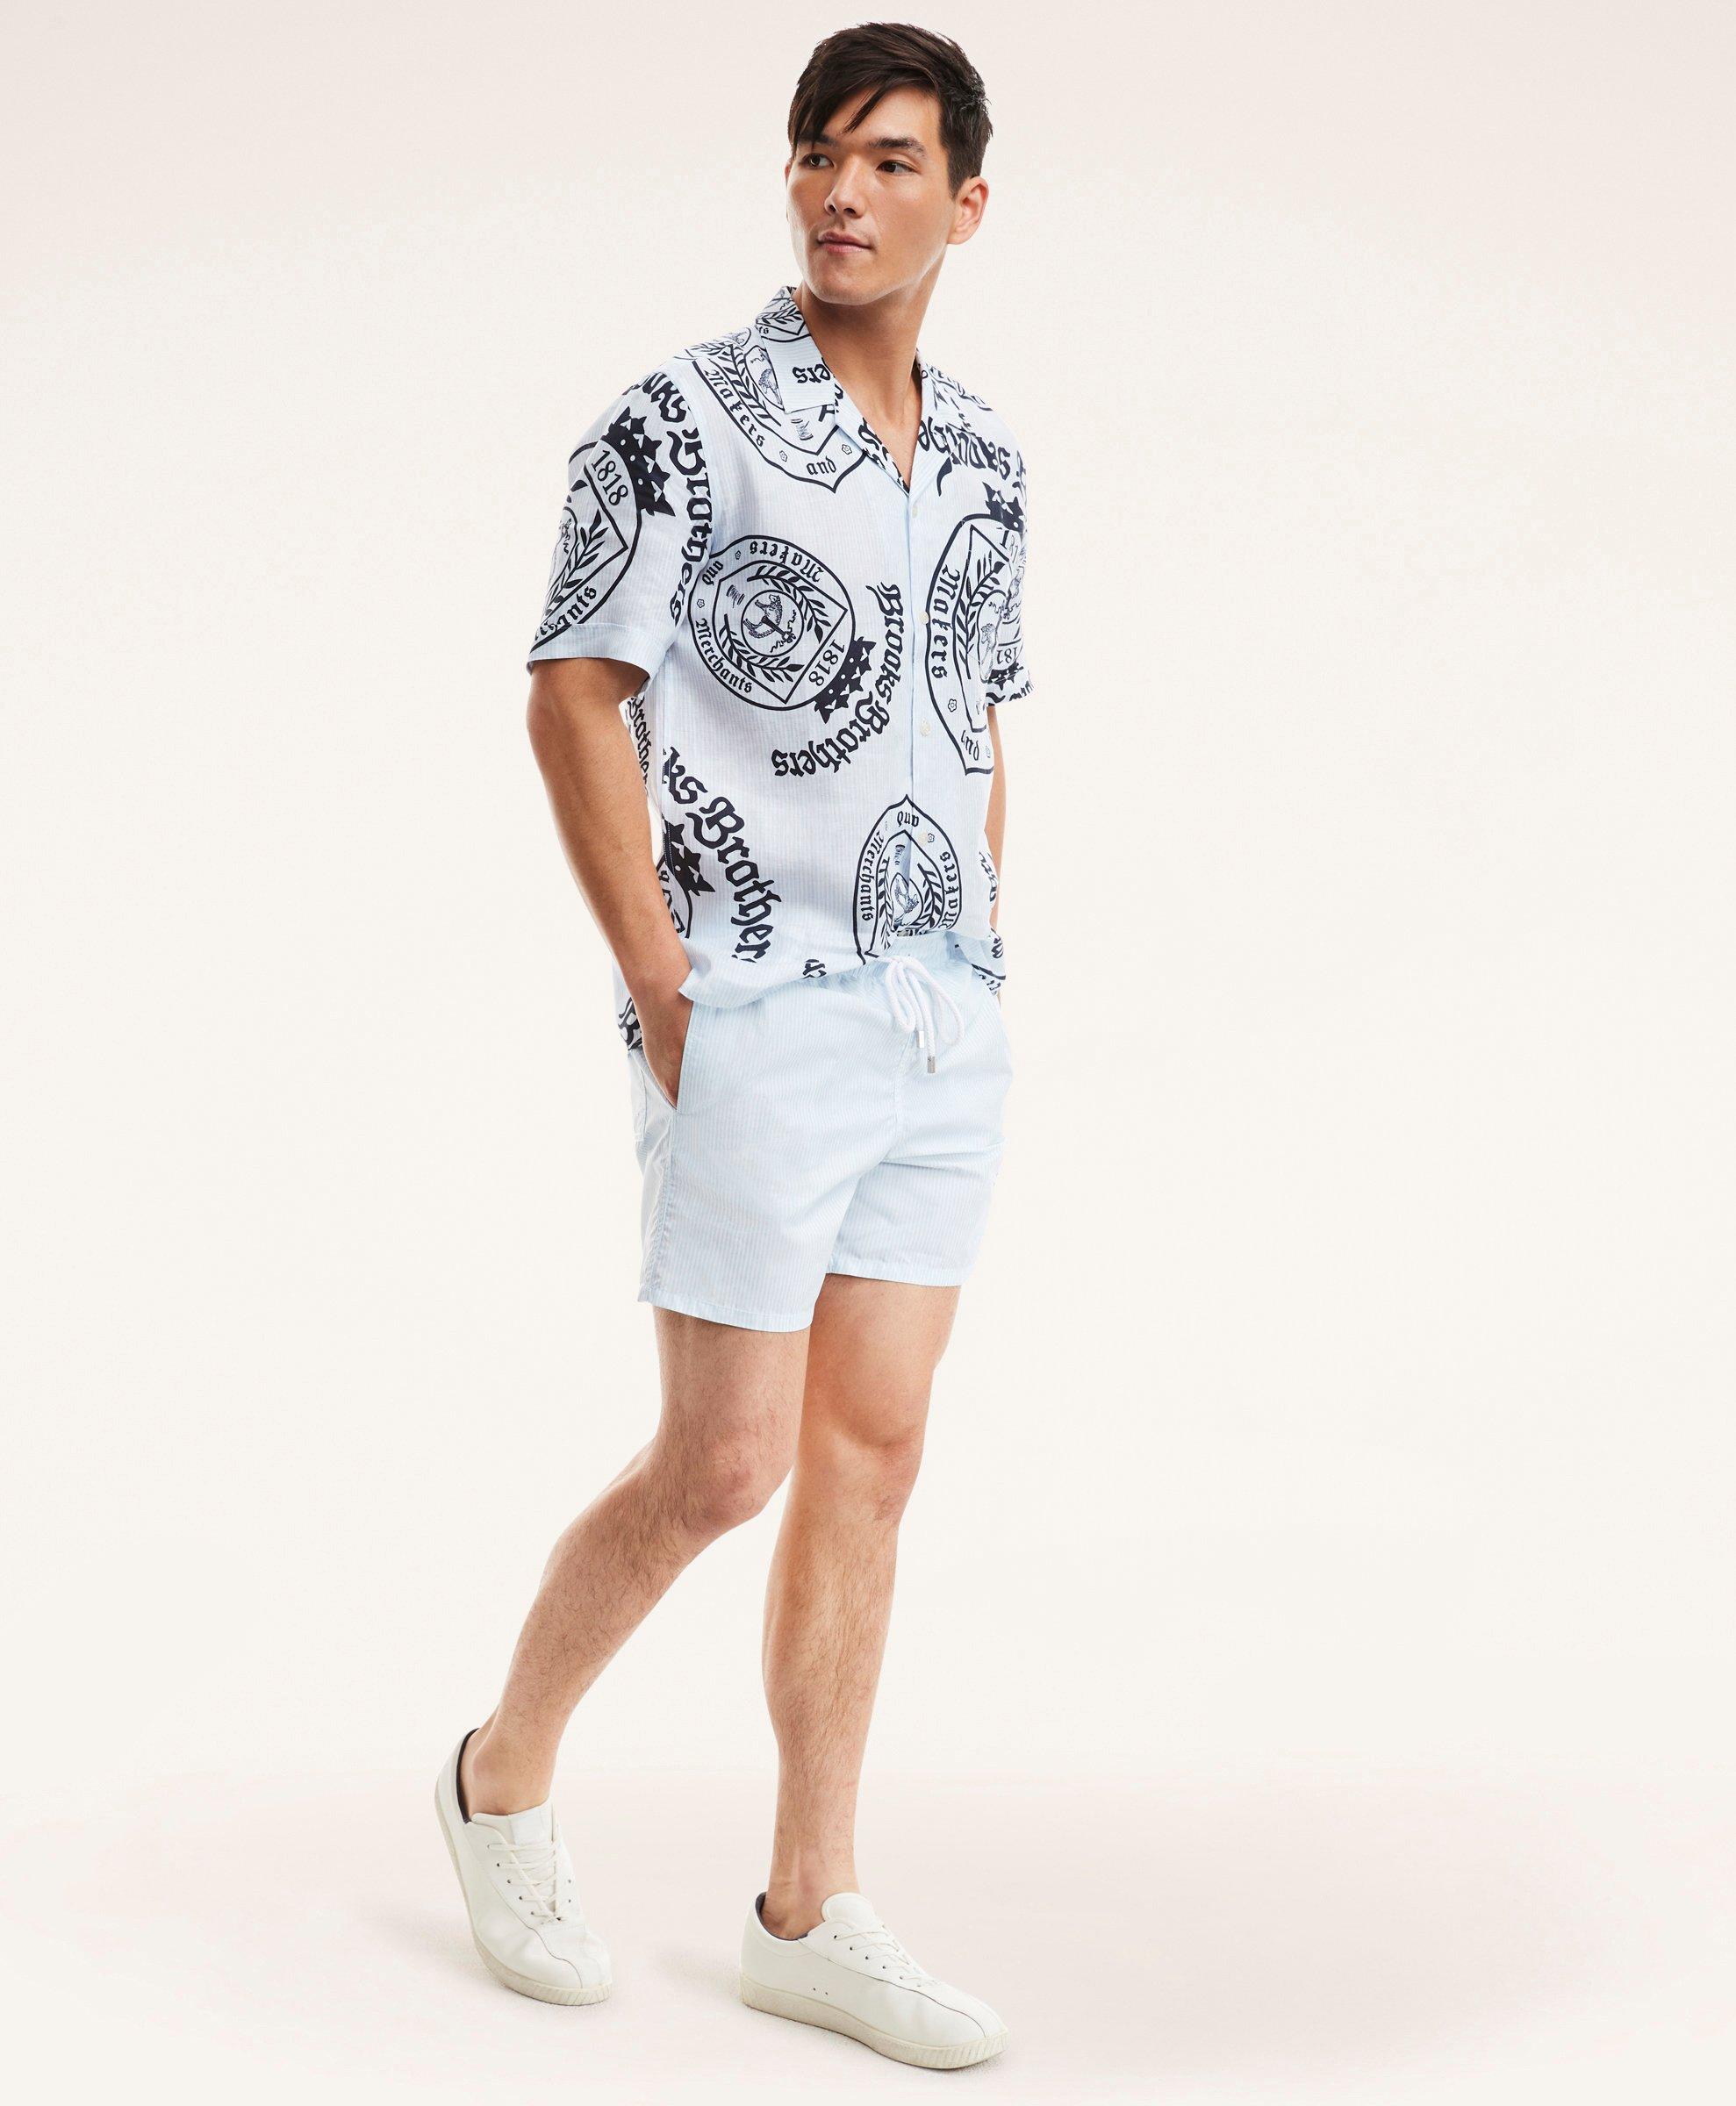 Brooks Brothers Et Vilebrequin Bowling Shirt in the Seal of Approval Print